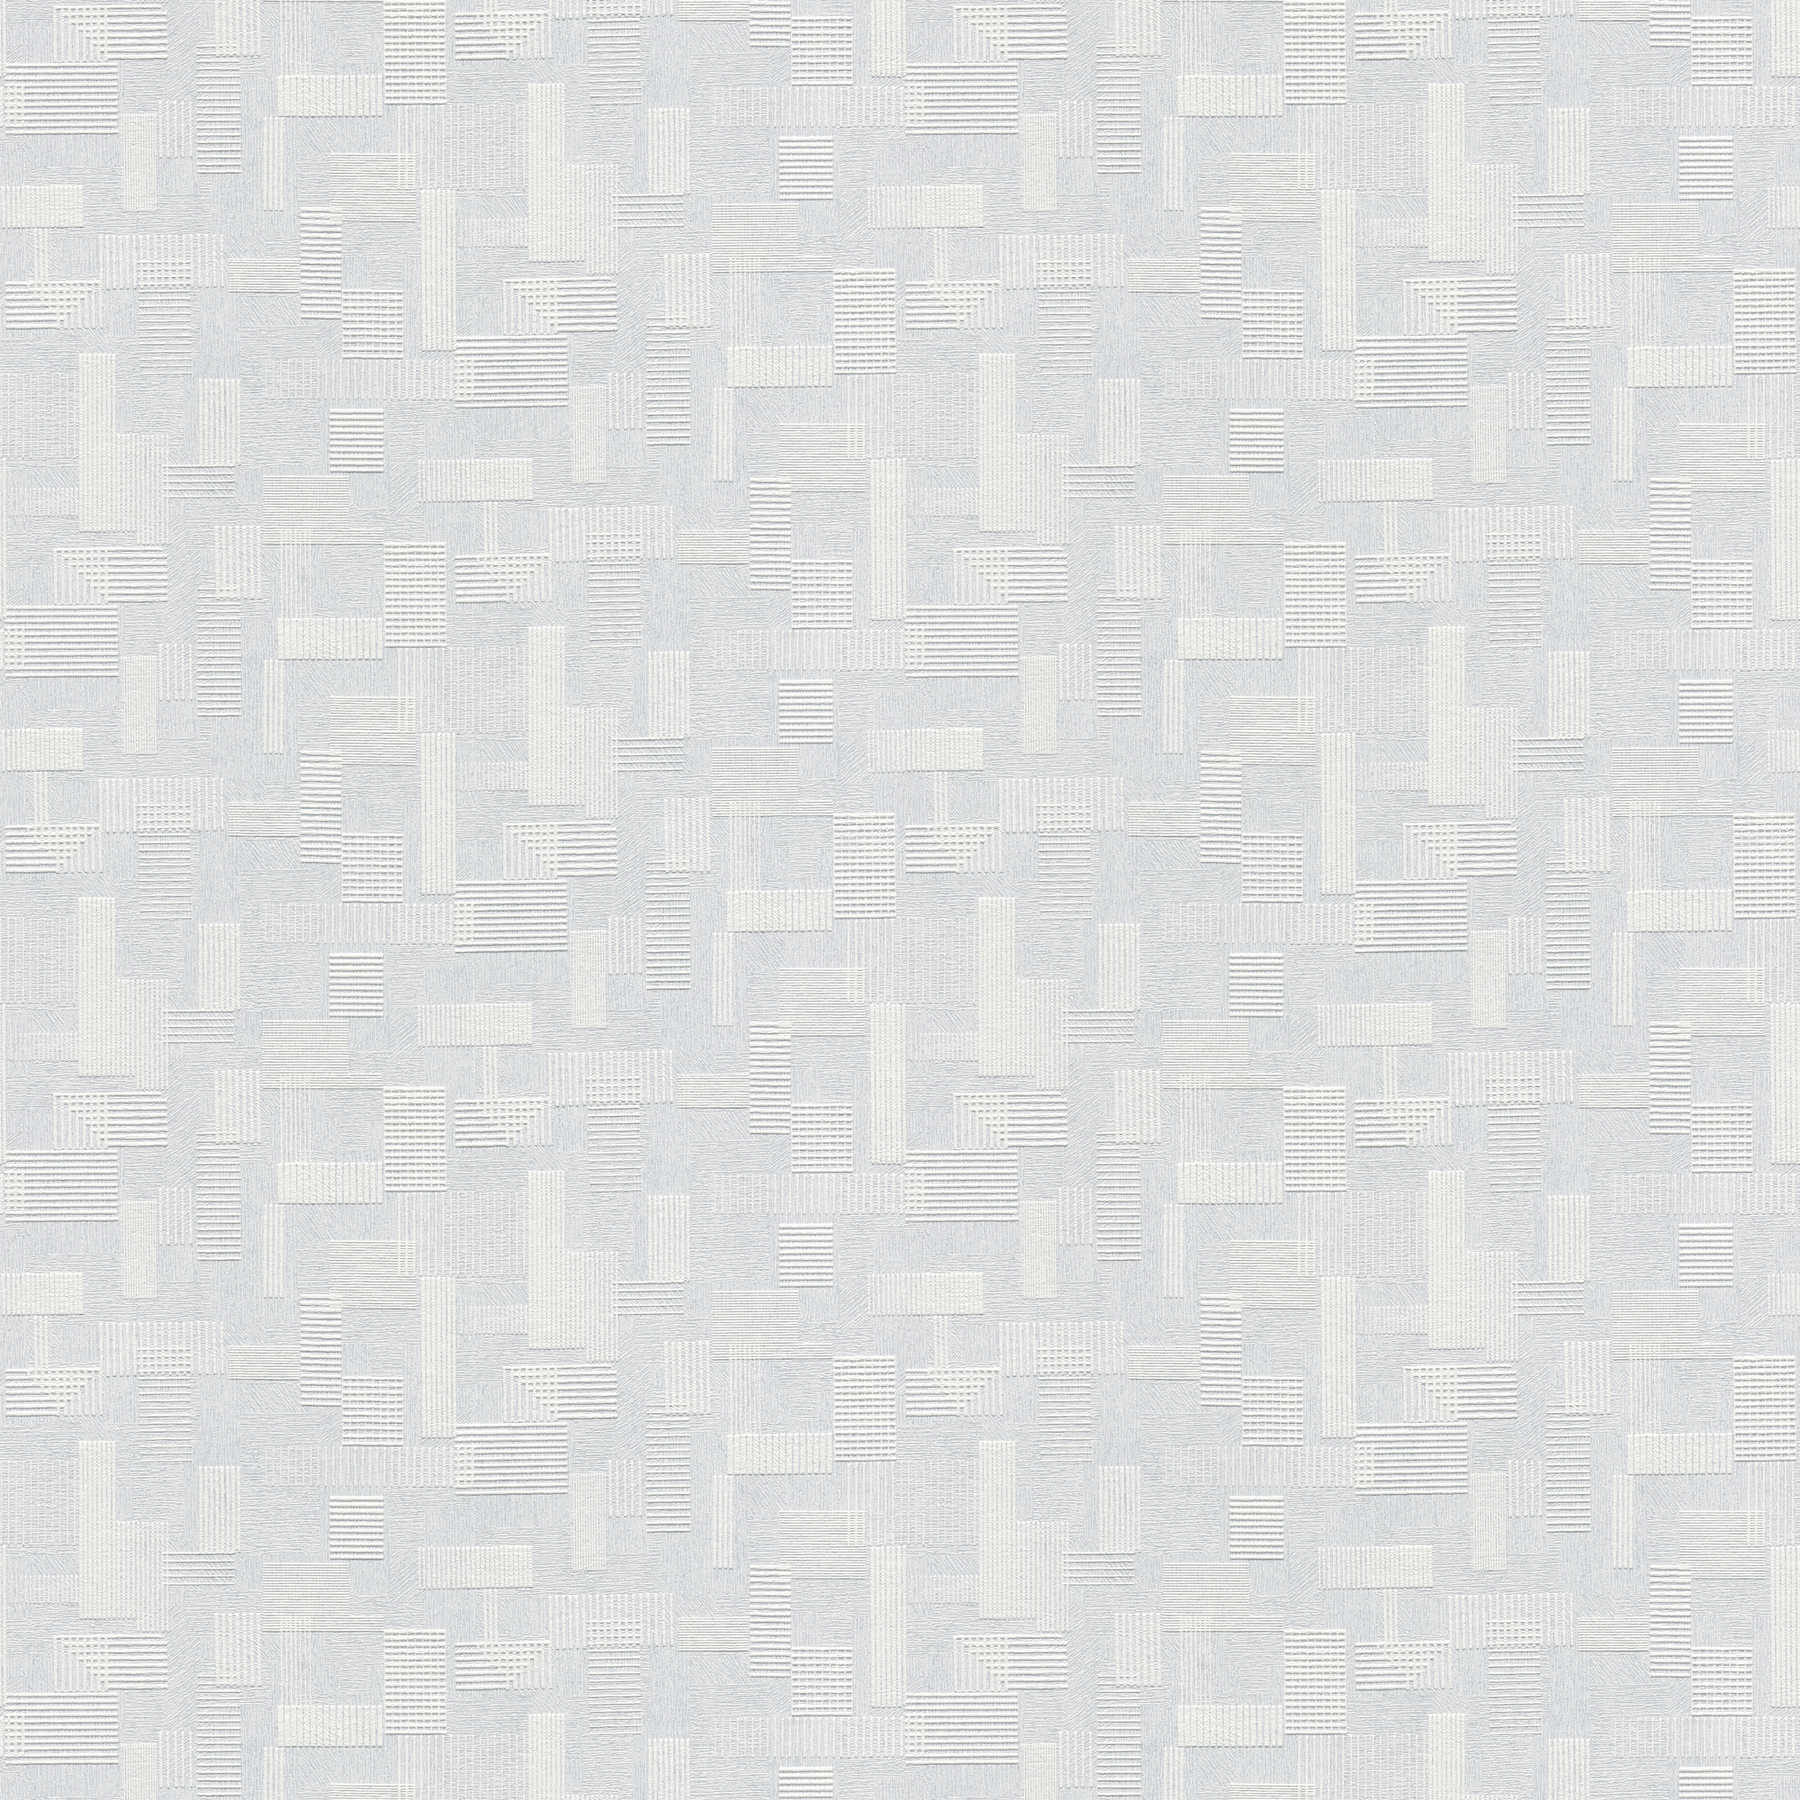         Retro wallpaper with geometric design and 3D effect - white
    